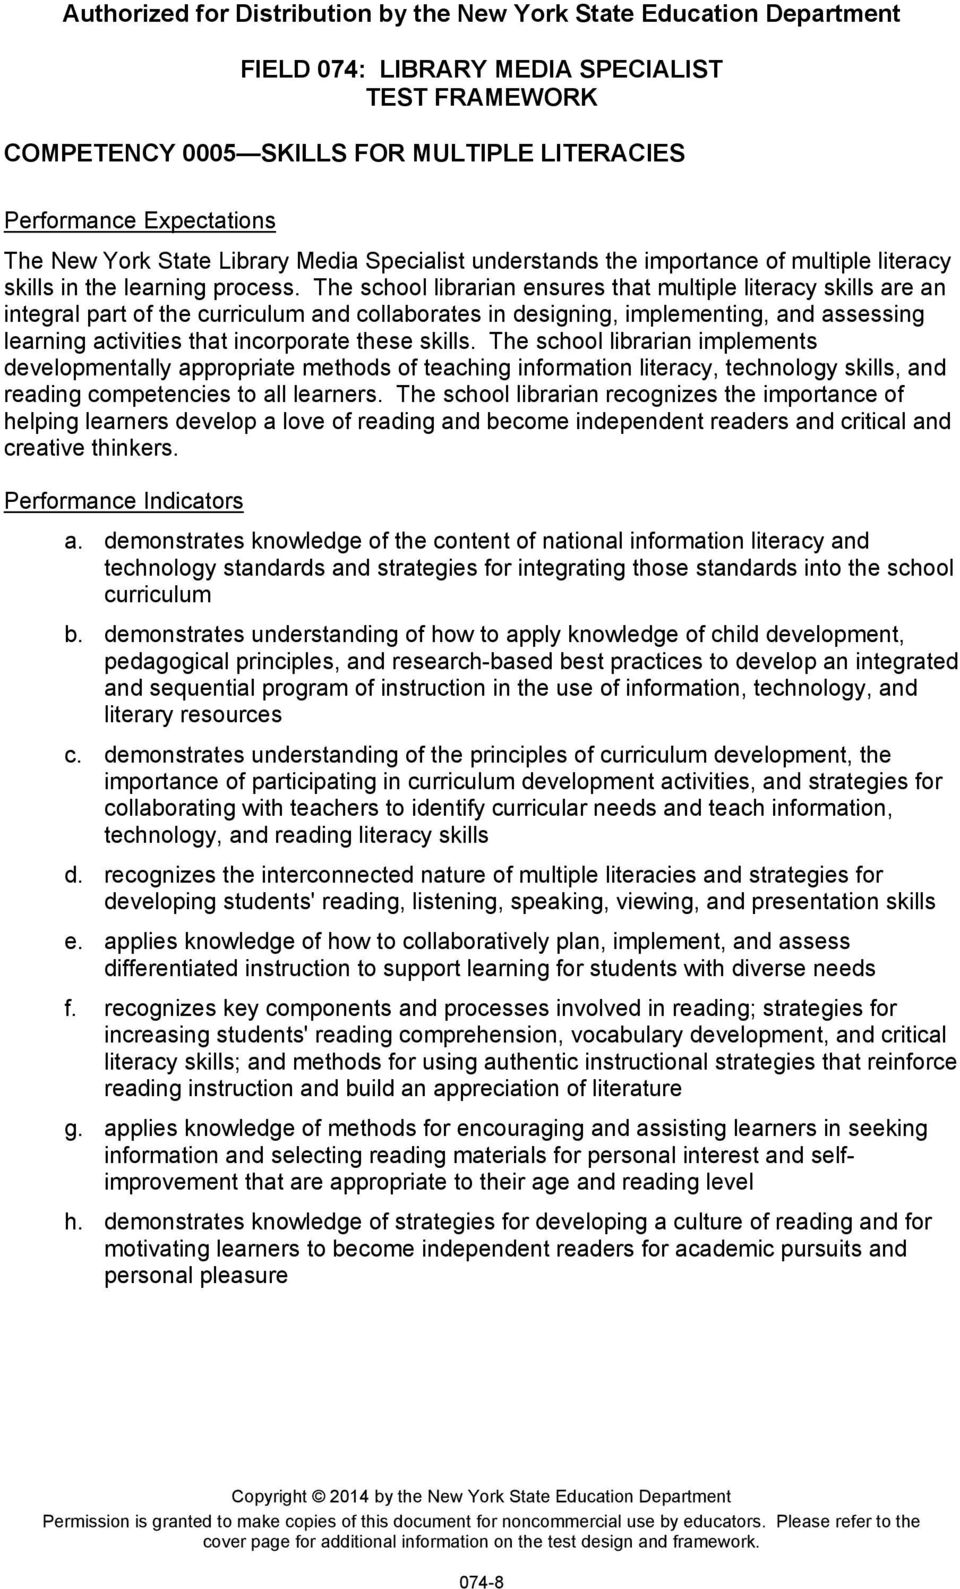 skills. The school librarian implements developmentally appropriate methods of teaching information literacy, technology skills, and reading competencies to all learners.